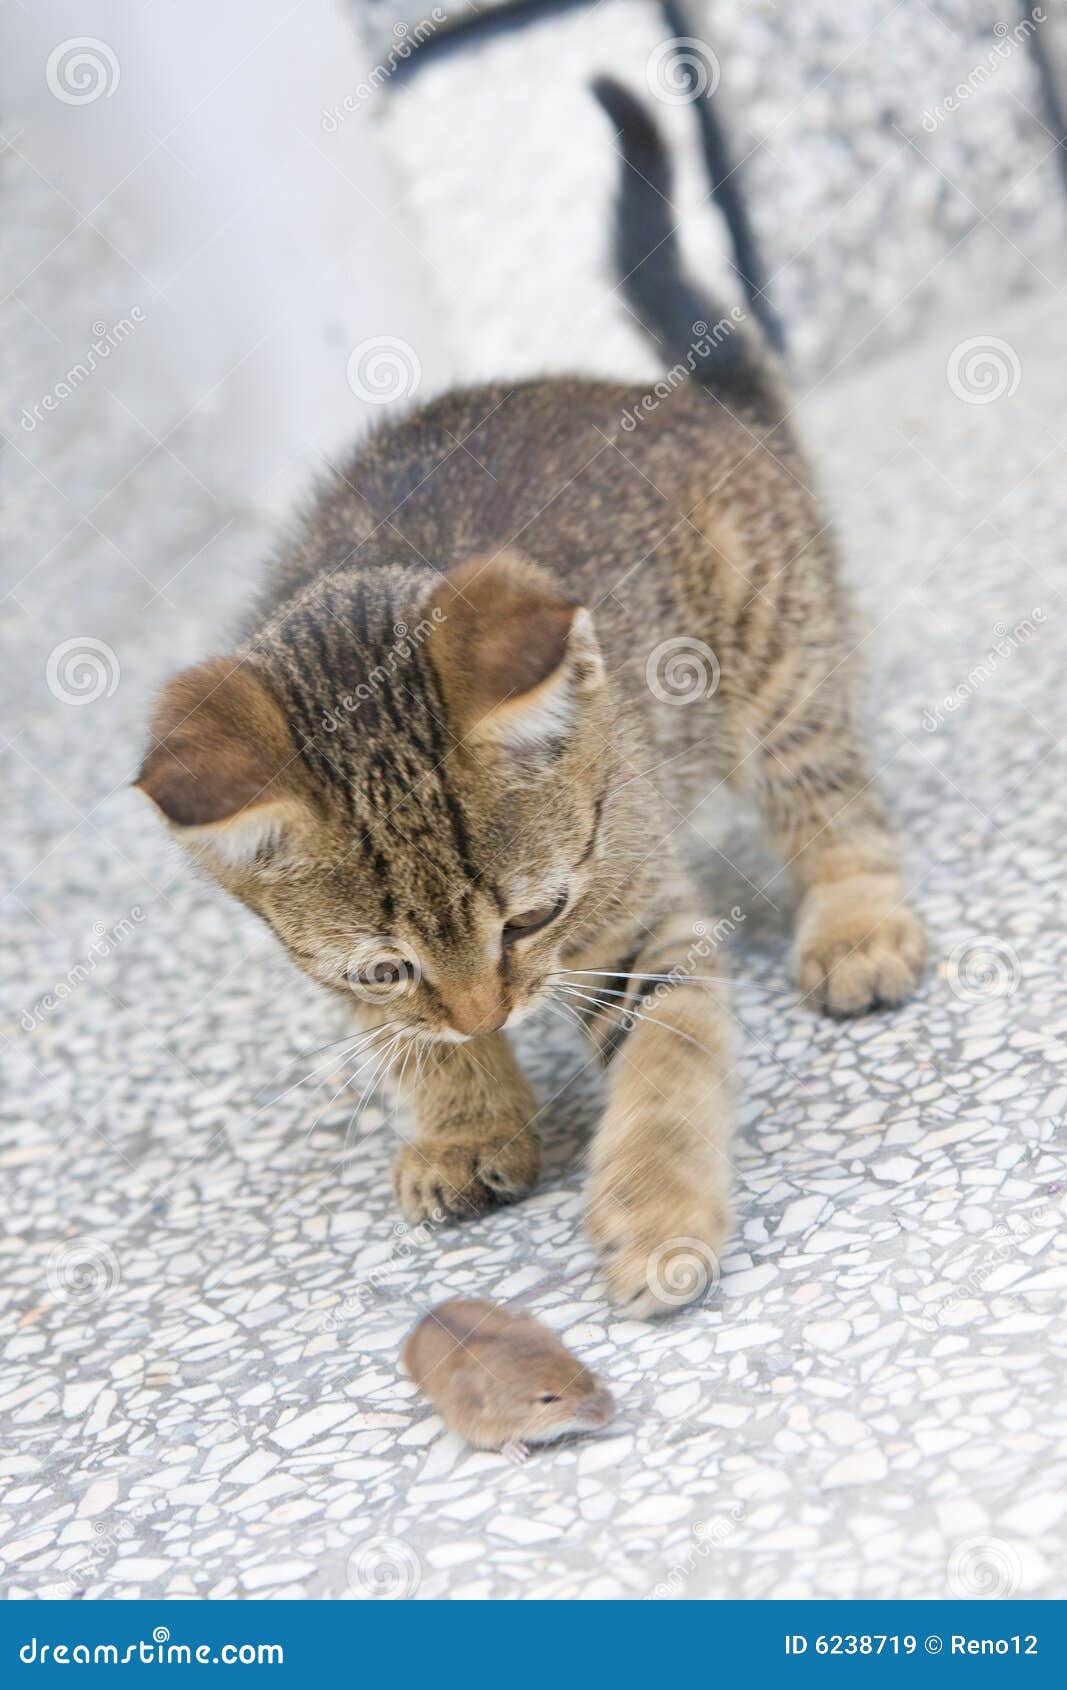 Cat and mouse stock image. Image of animals, mouse ...